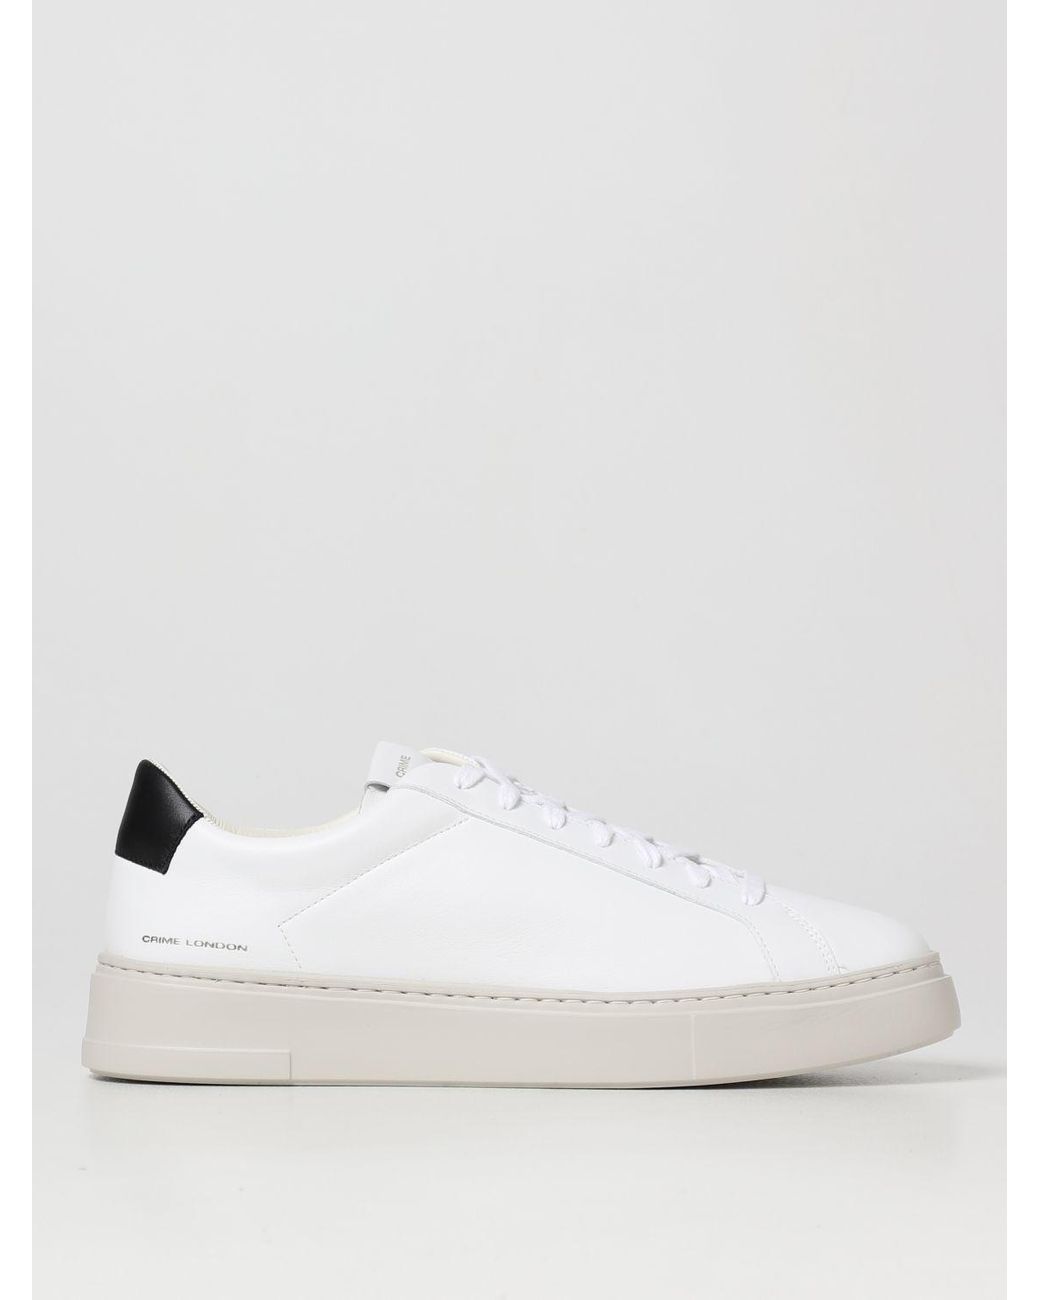 Crime London Sneakers in Natural for Men | Lyst